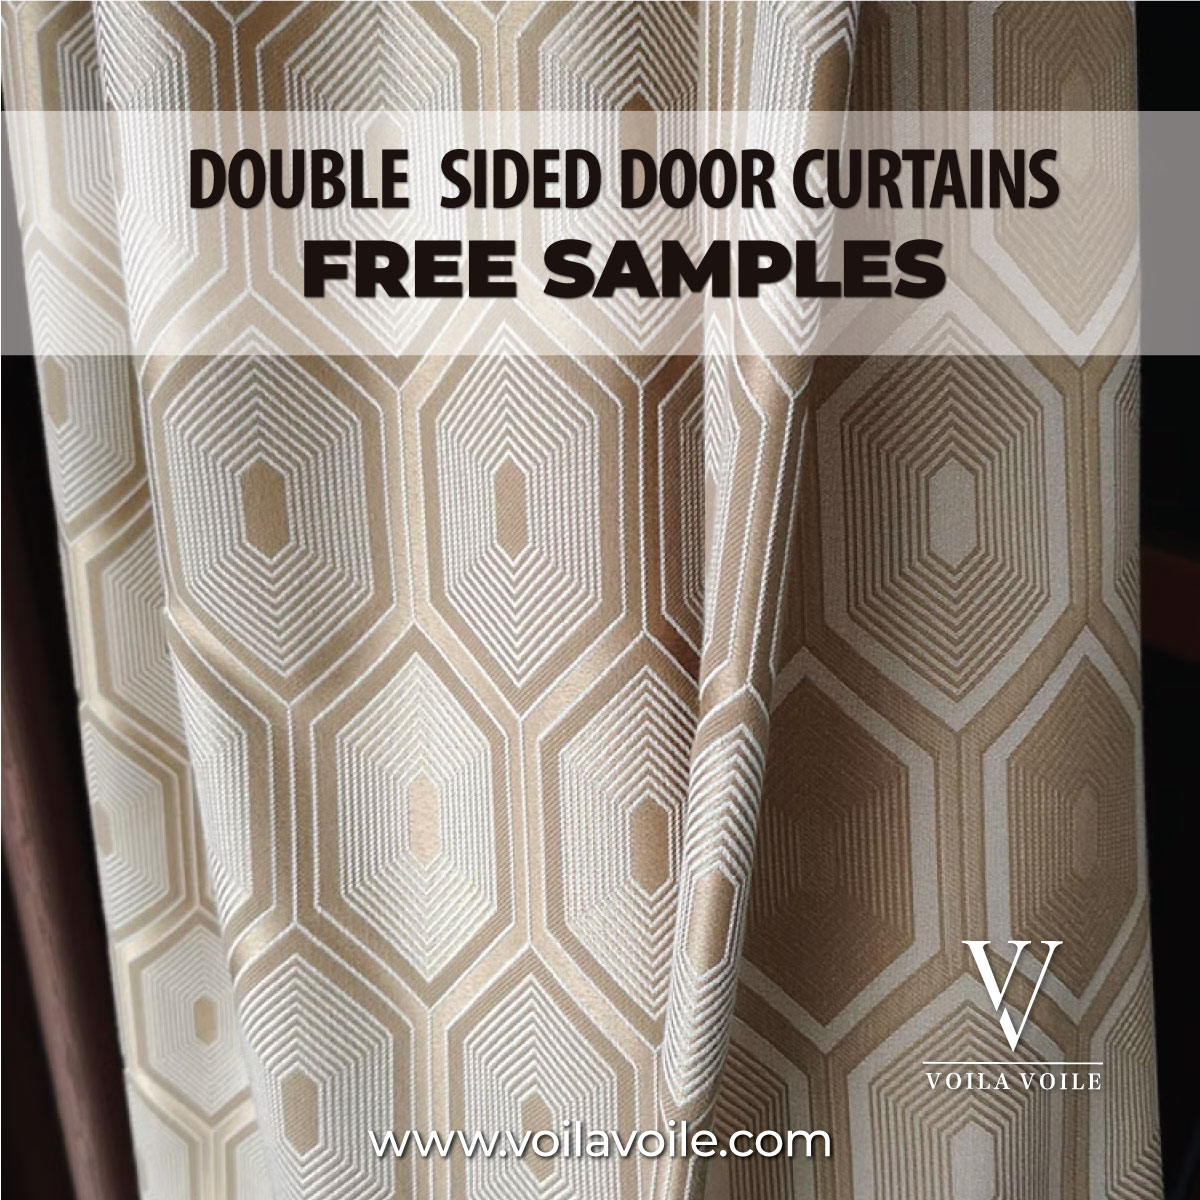 Double Sided Door Curtains